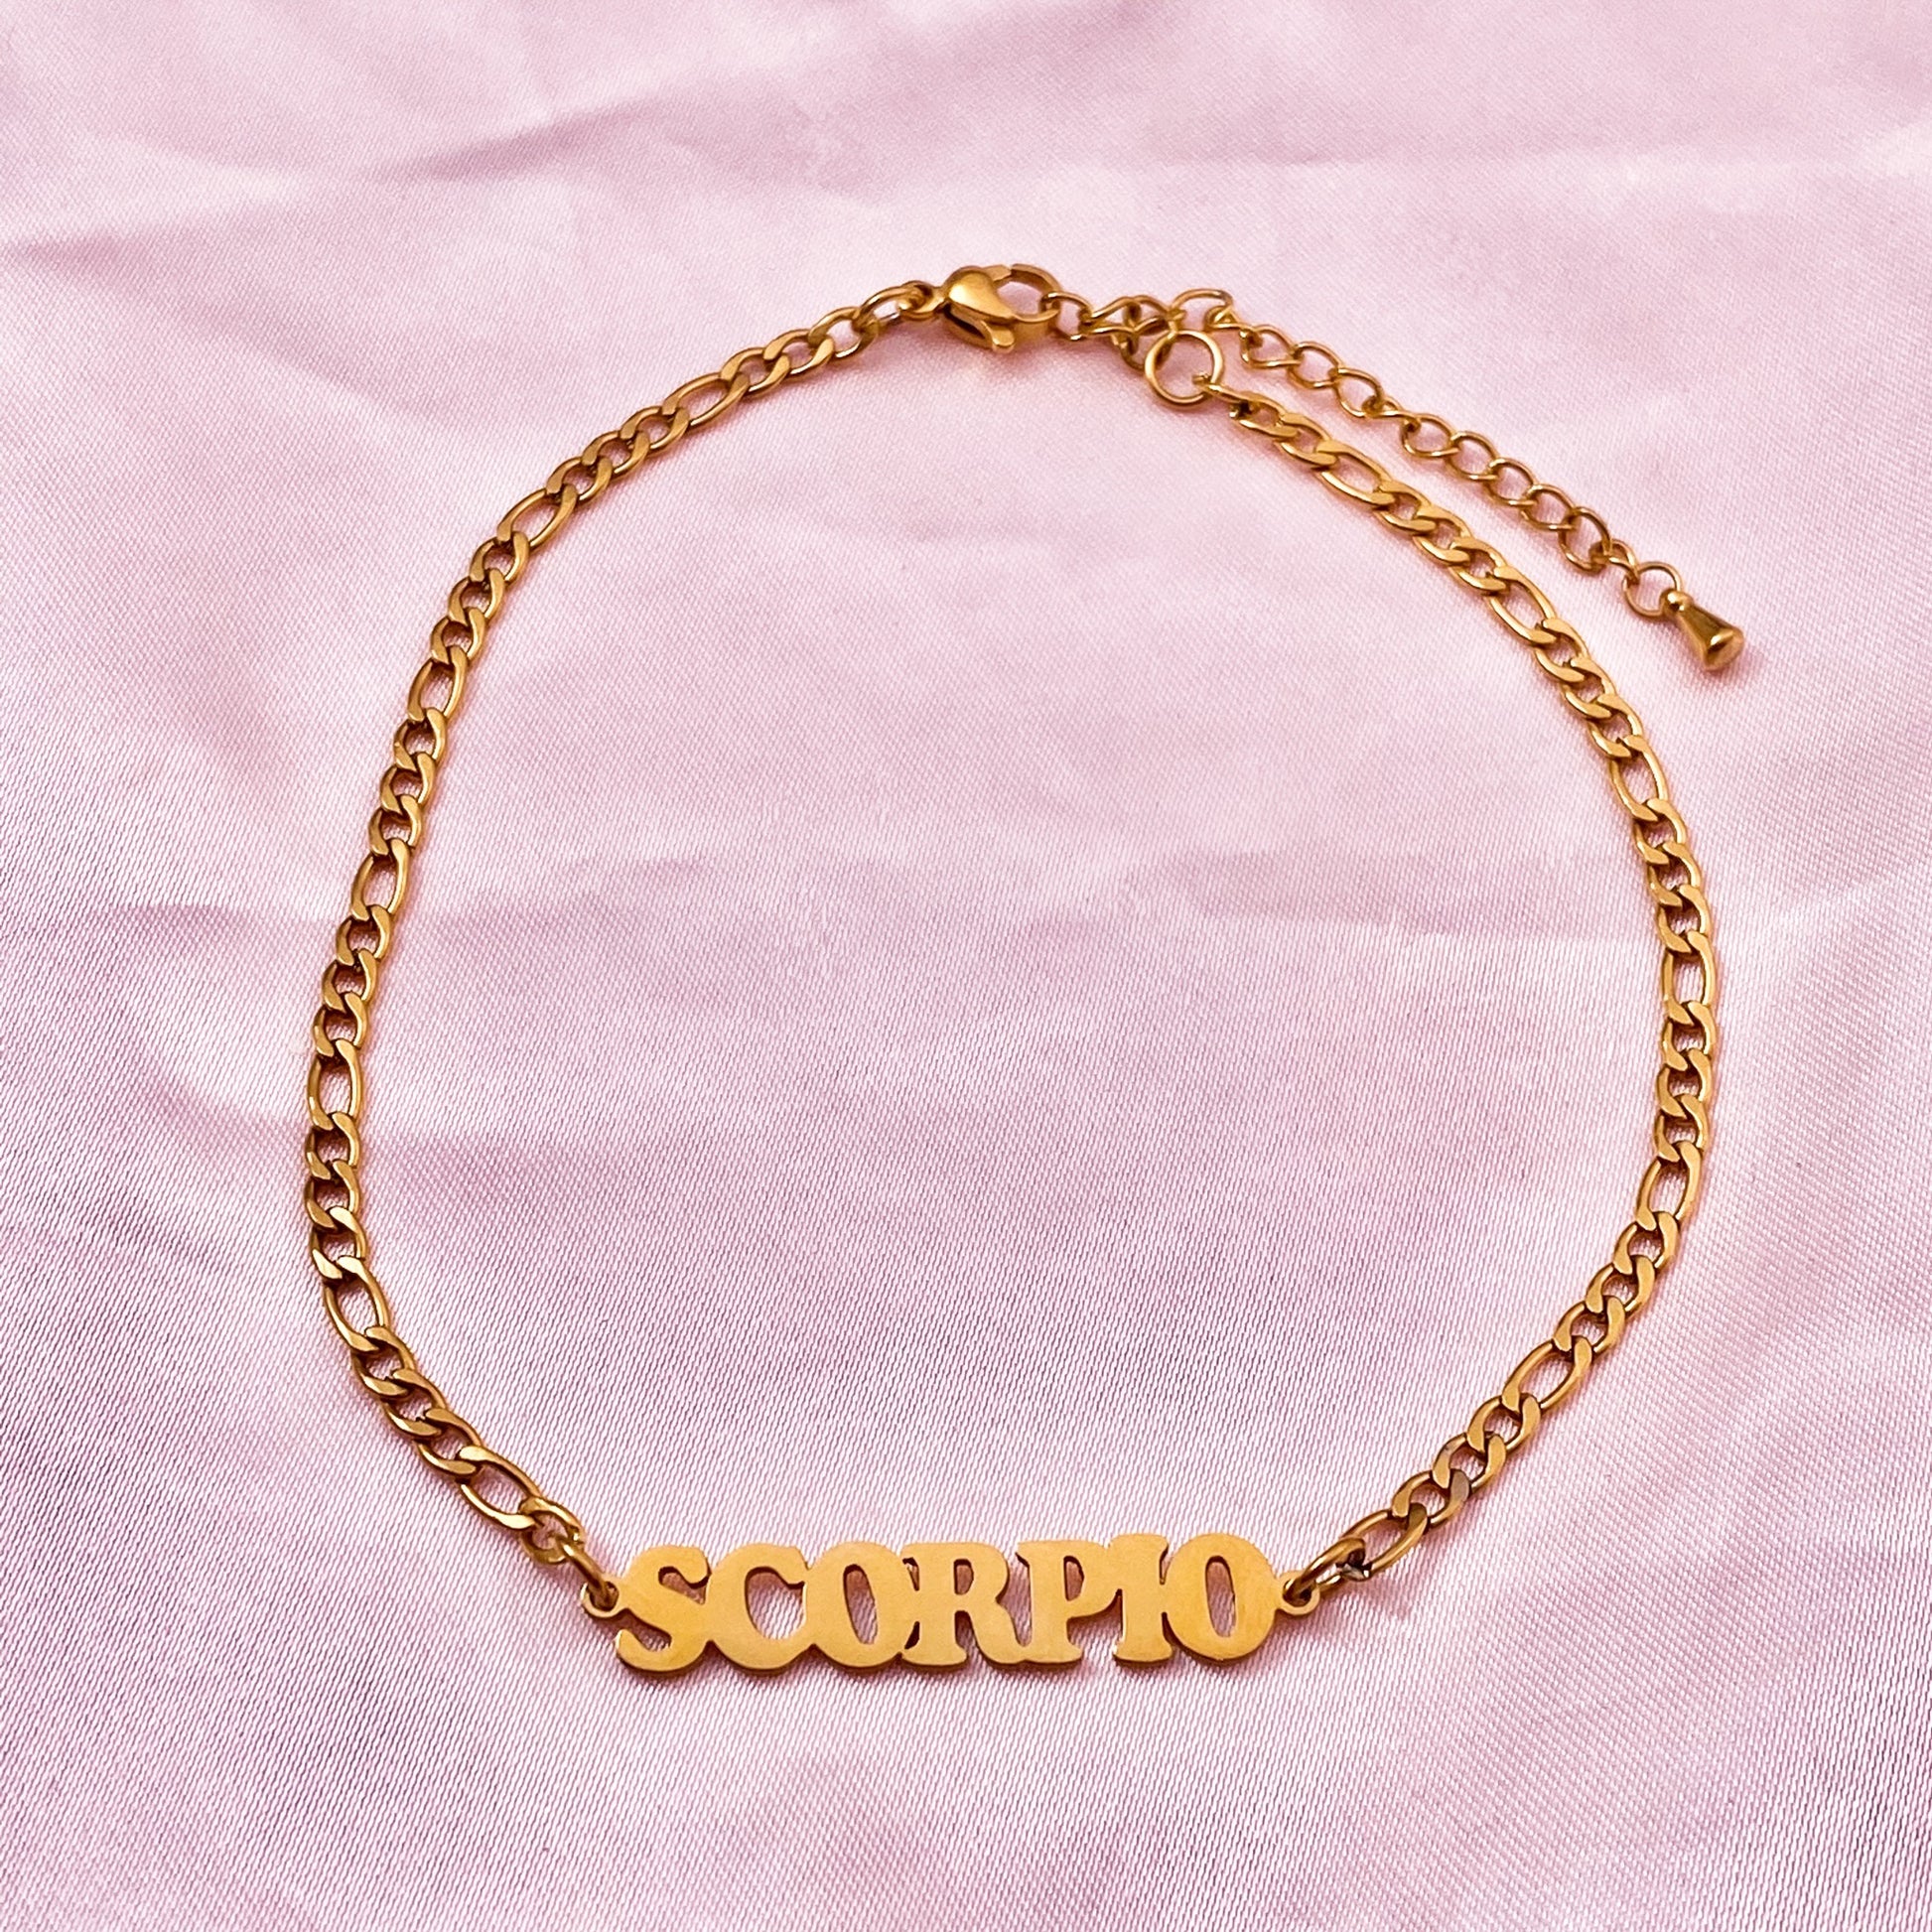 Scorpio Anklet – Shipping Department